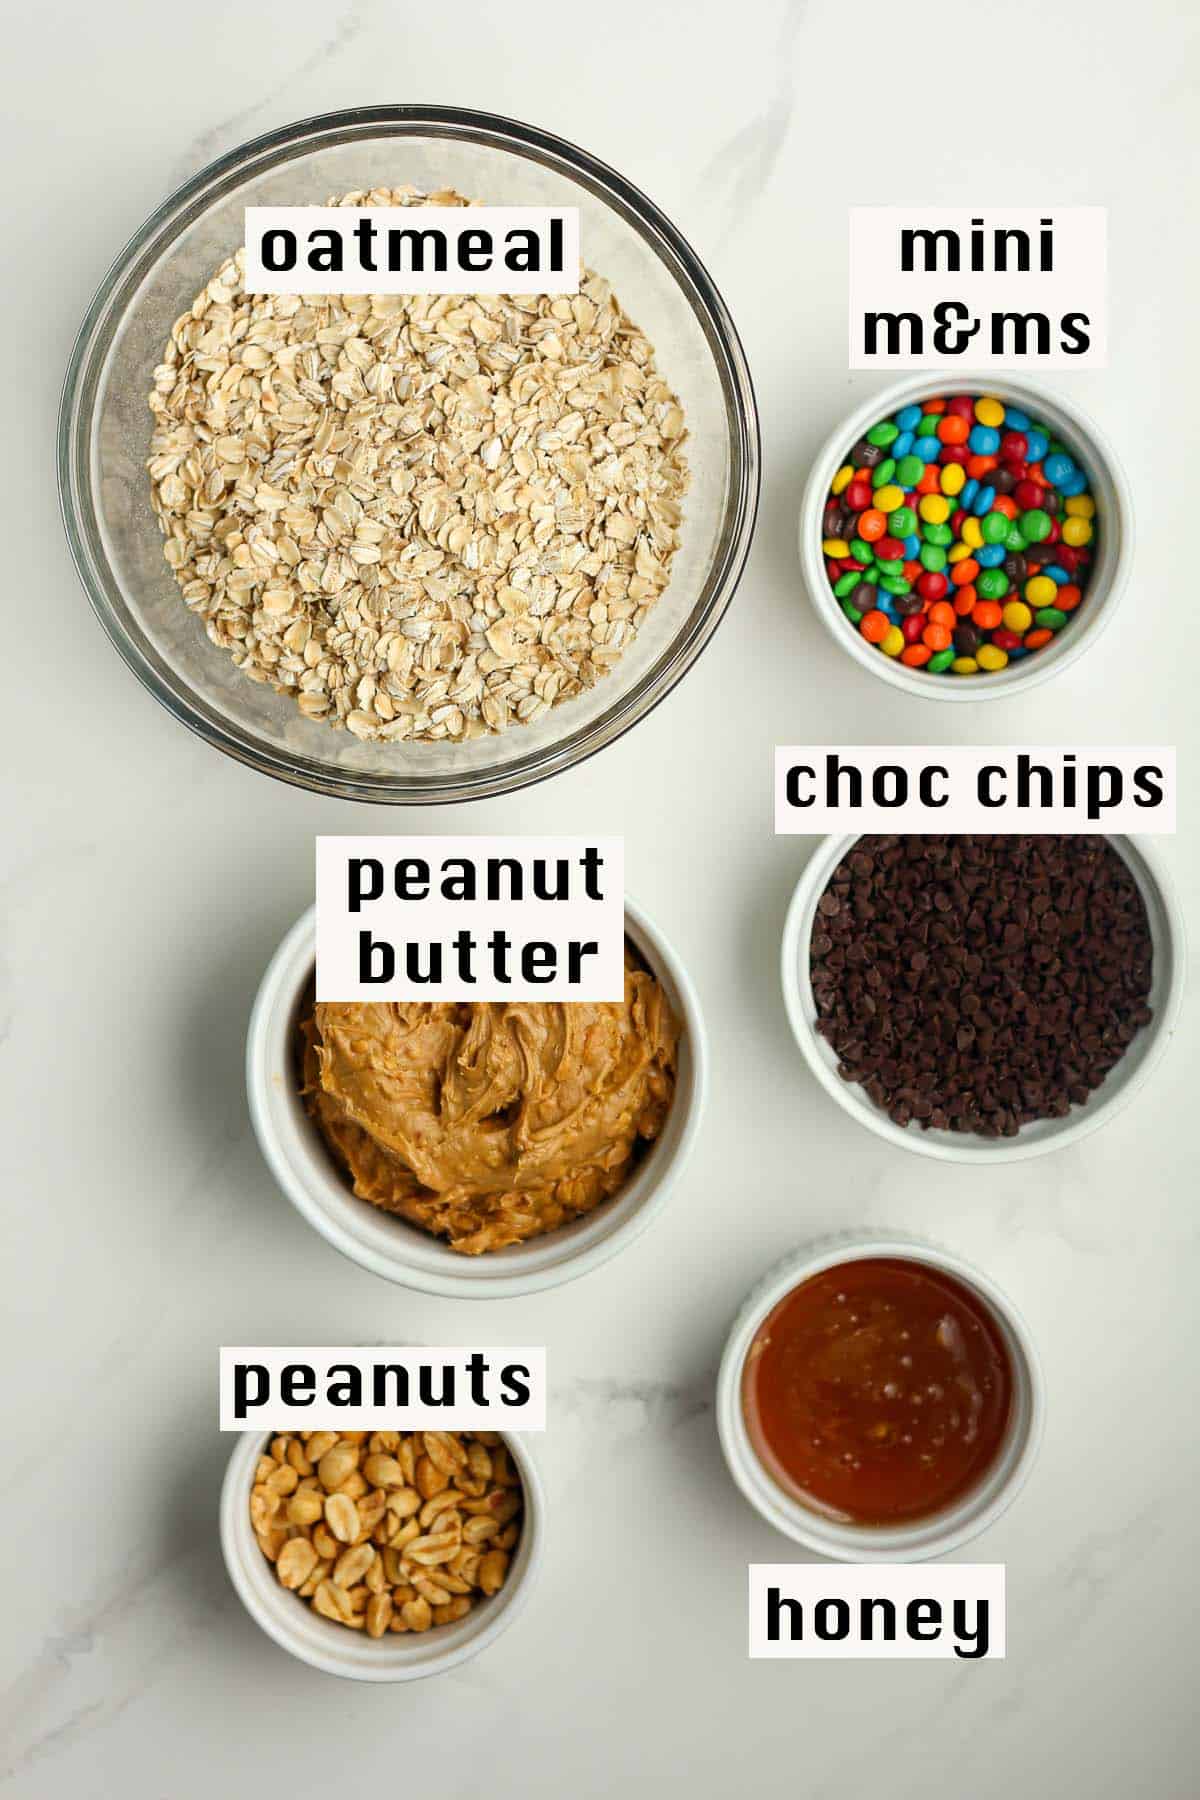 The ingredients for no bake monster cookie balls.